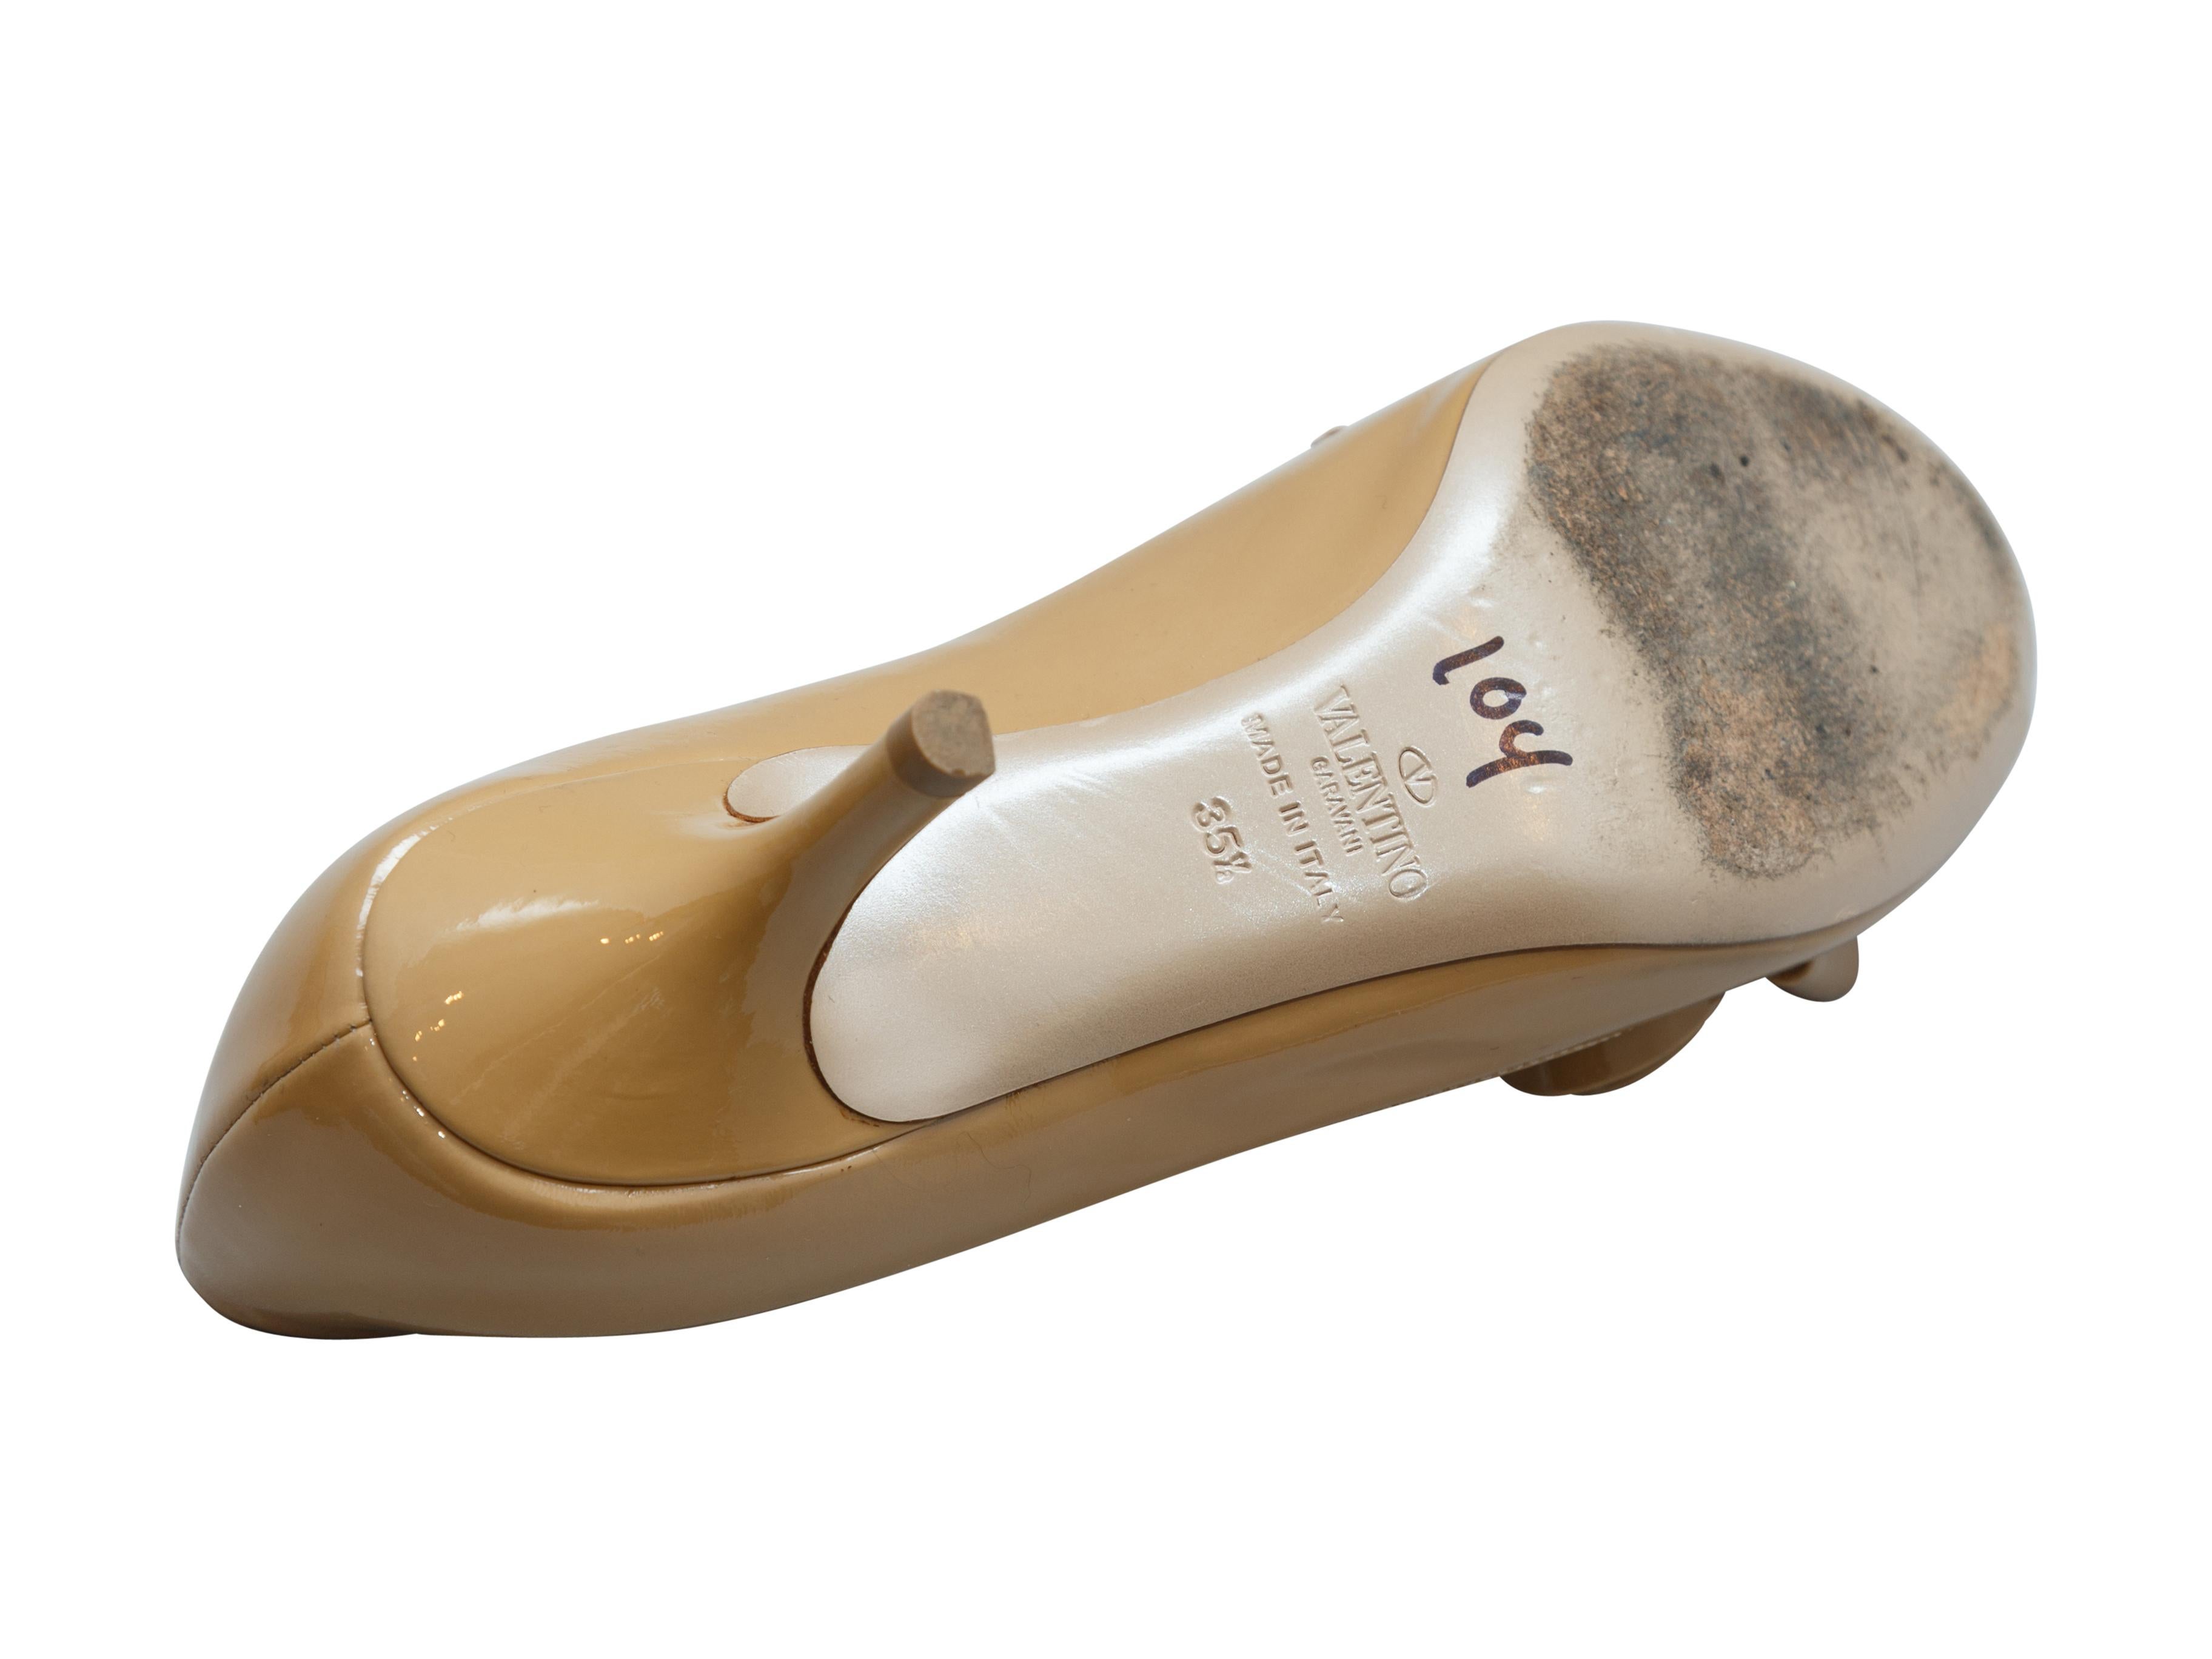 Product details: Beige patent leather peep-toe heels by Valentino. Bow accent at tops. Designer size 35.5. 2.5